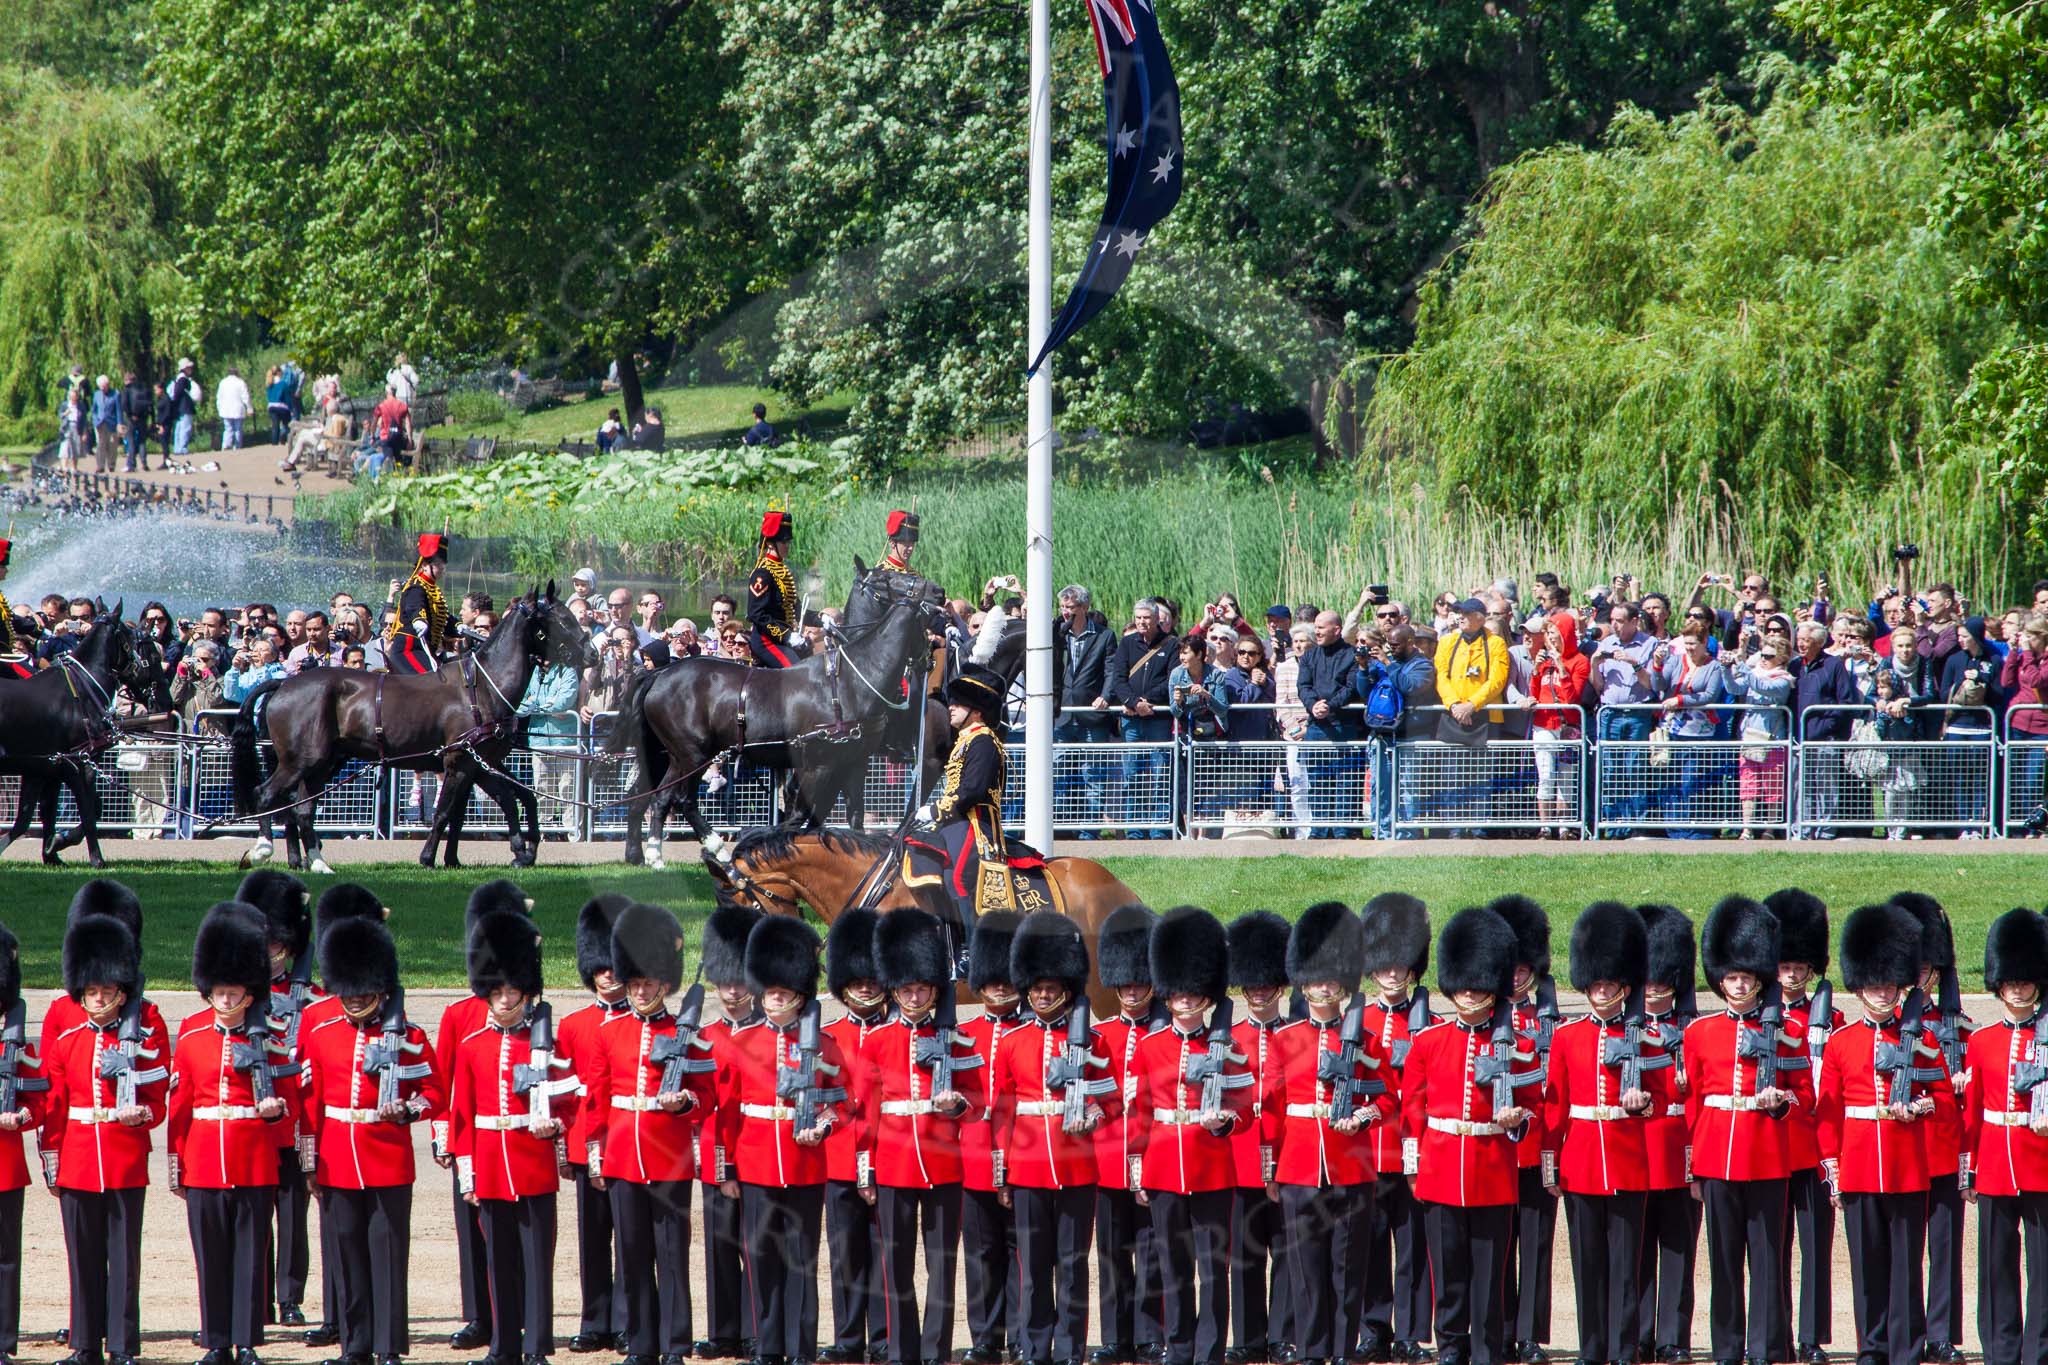 The Colonel's Review 2013: The King's Troop Royal Horse Artillery arrives, and will take position between No. 1 Guard and St. James's Park..
Horse Guards Parade, Westminster,
London SW1,

United Kingdom,
on 08 June 2013 at 10:38, image #182